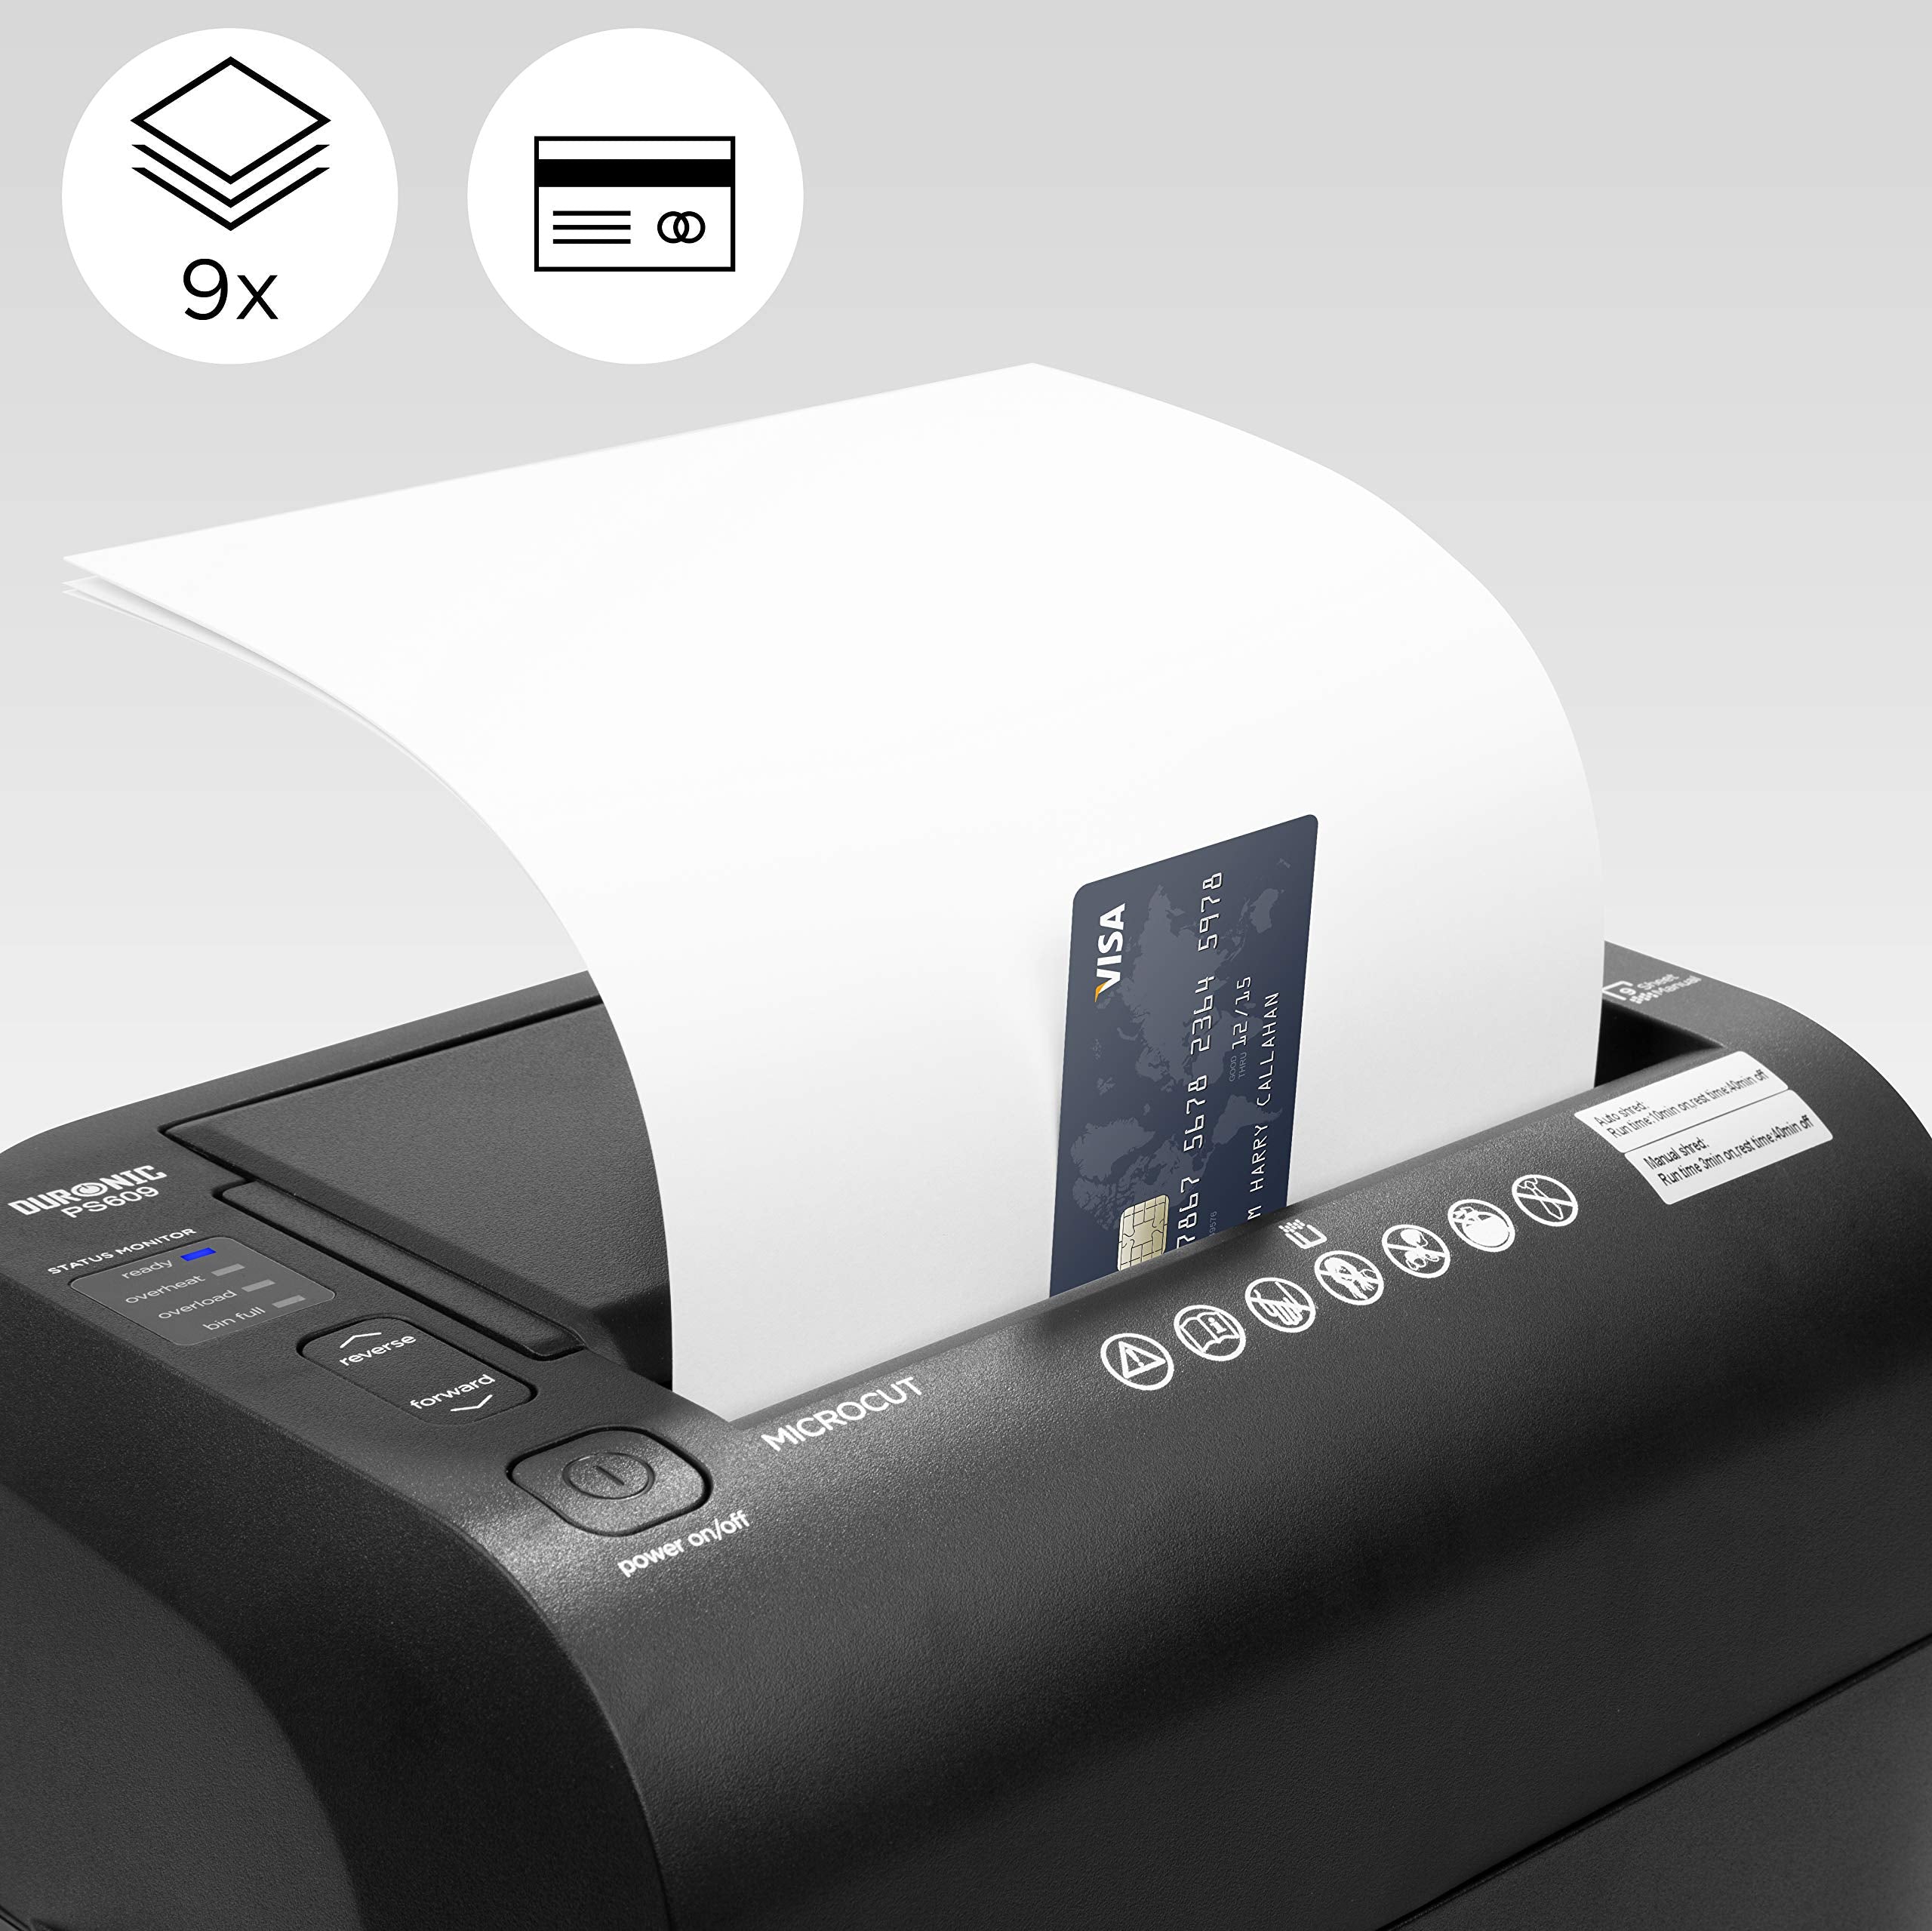 Duronic Paper Shredder PS609 | 6-9 A4 Sheets 100 Sheet Auto Feed Micro Cross Cut Office Paper Shredder GDPR Compliant: Protect Against Data Theft With 17 Litre Bin & Thermal Overload Protection